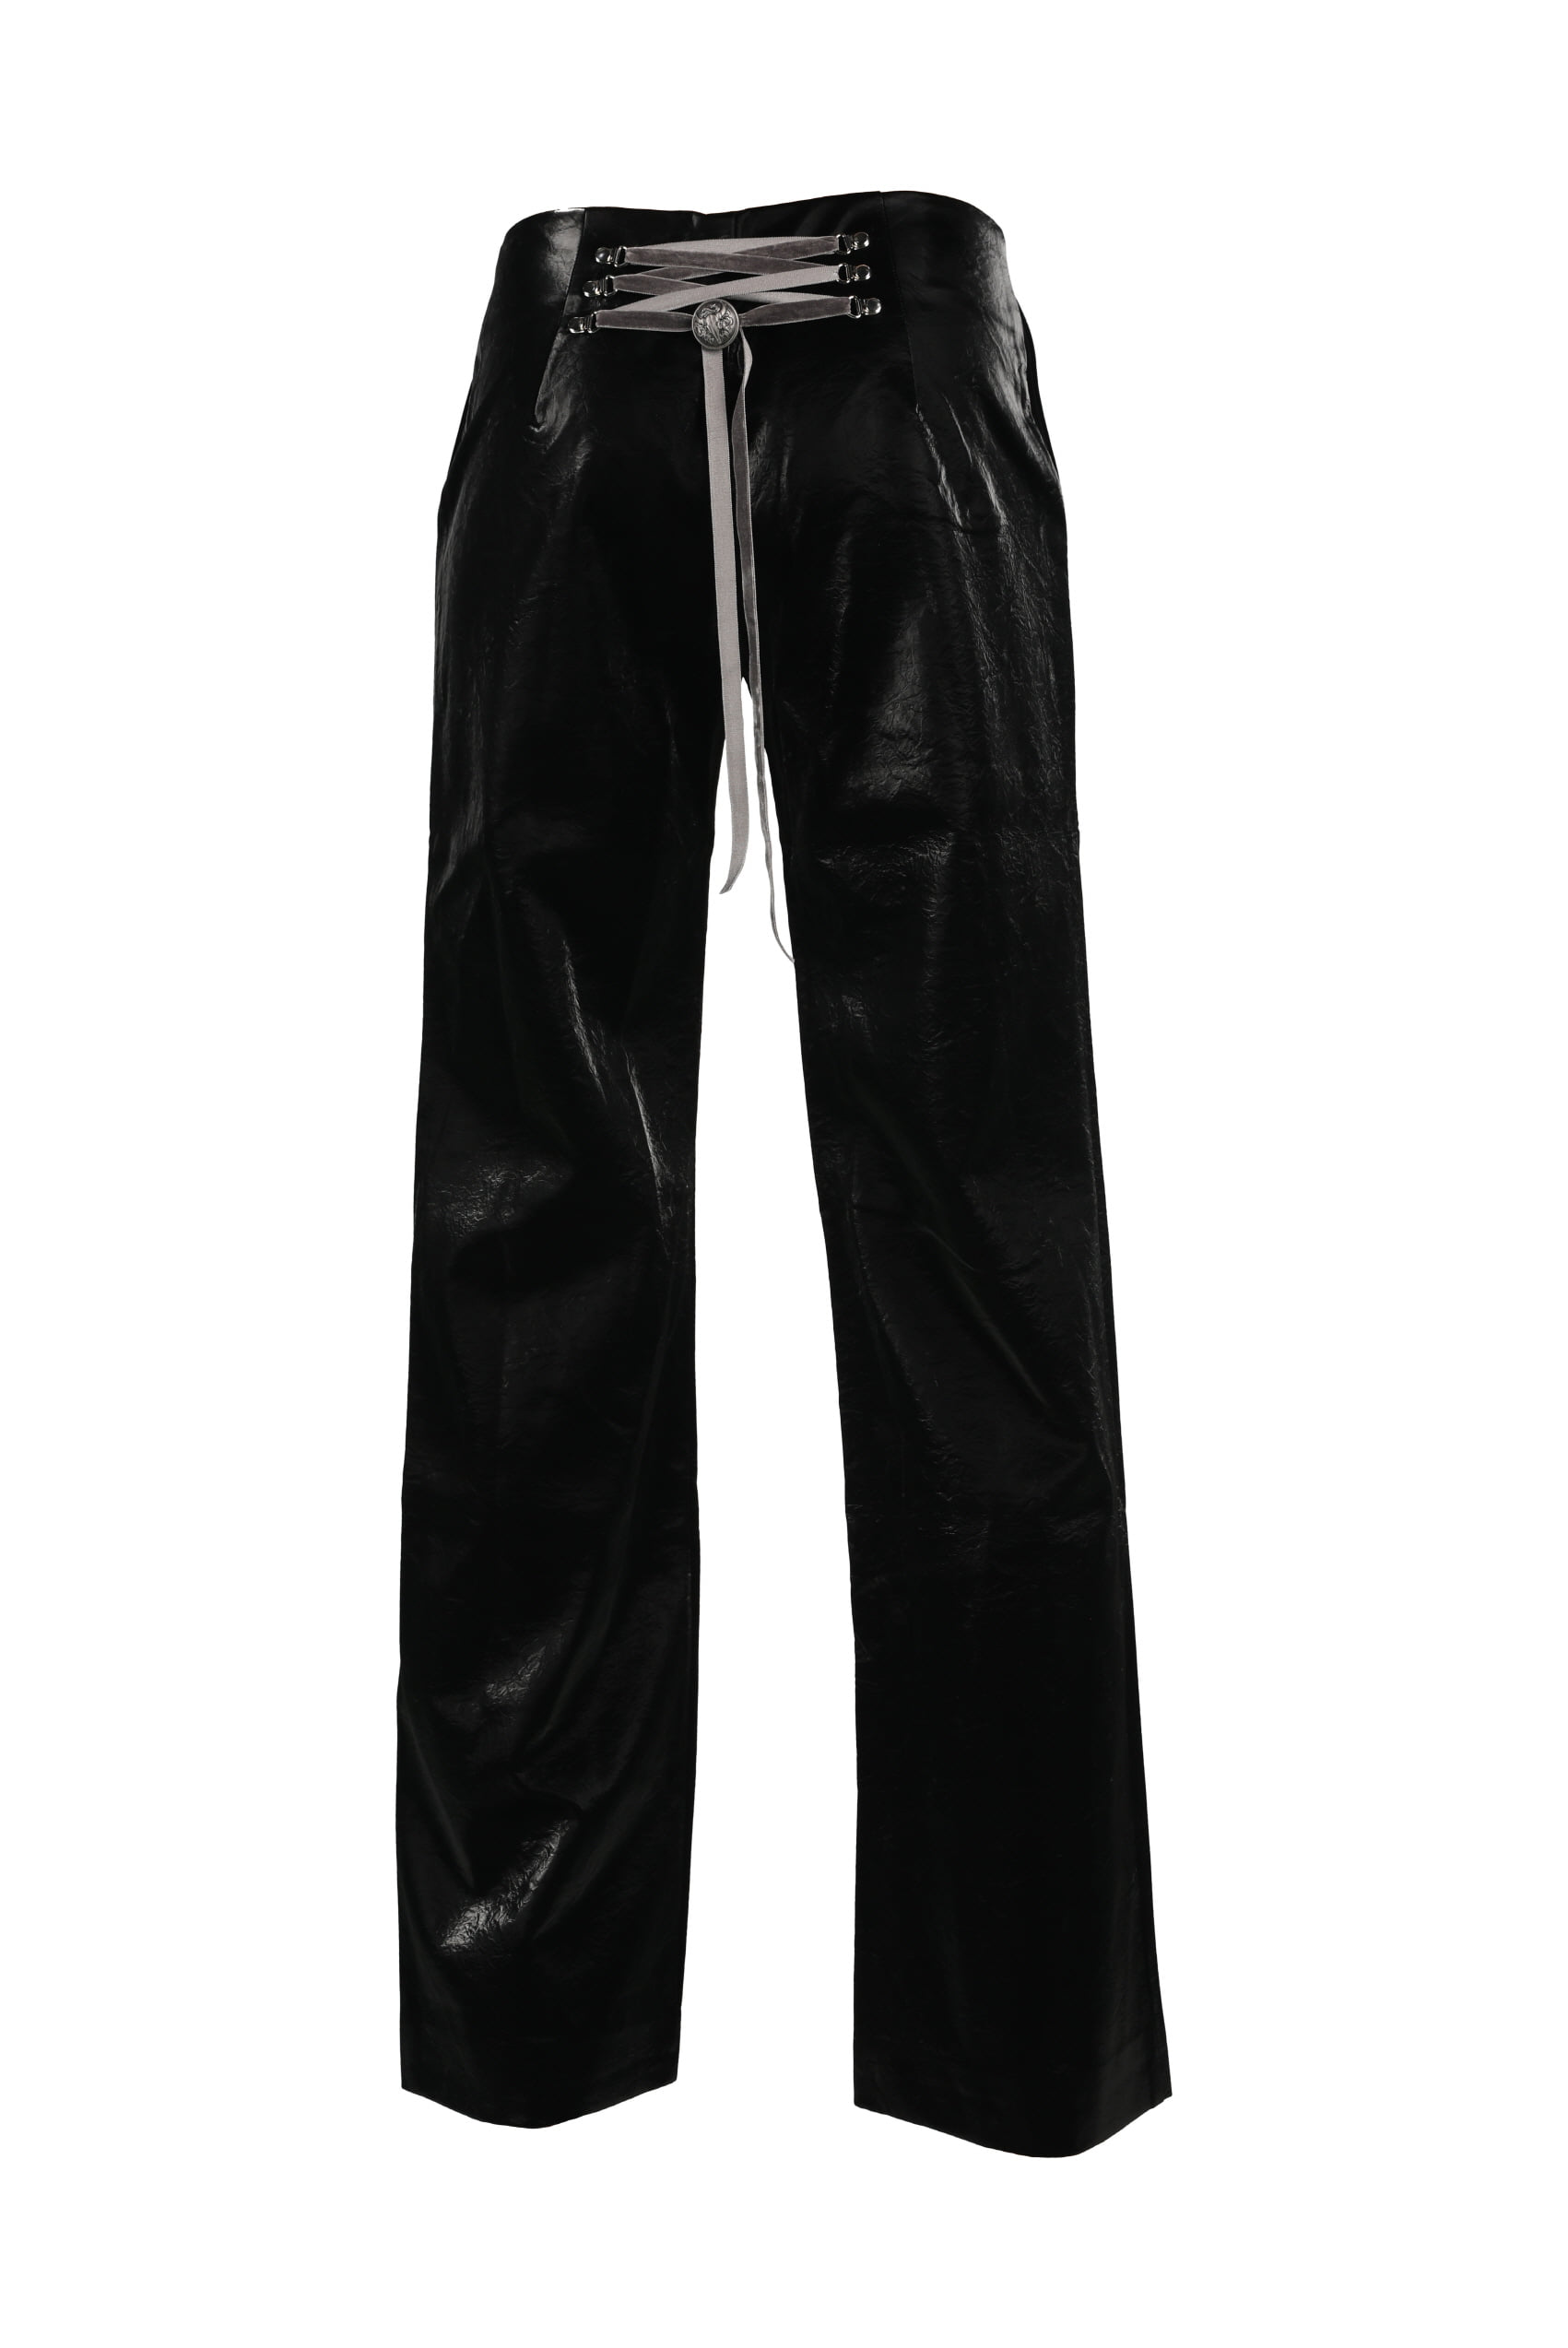 Shabby leather low rise trousers